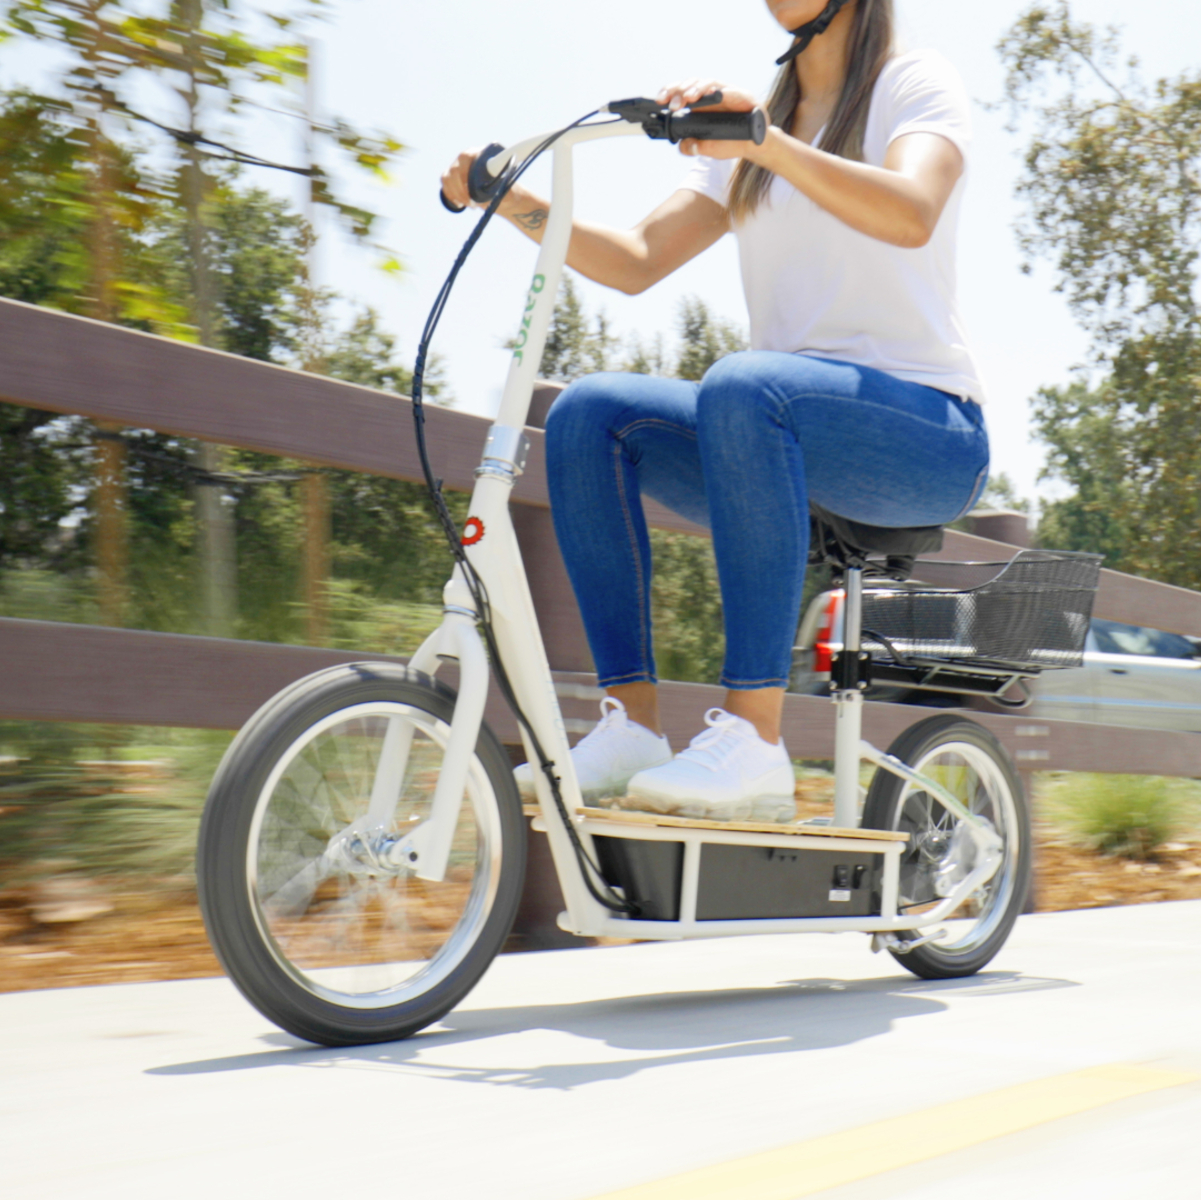 walmart slashes prices on <entity>electric bikes</entity> and razor e scooters for labor day 36 volt ecosmart metro scooter 2